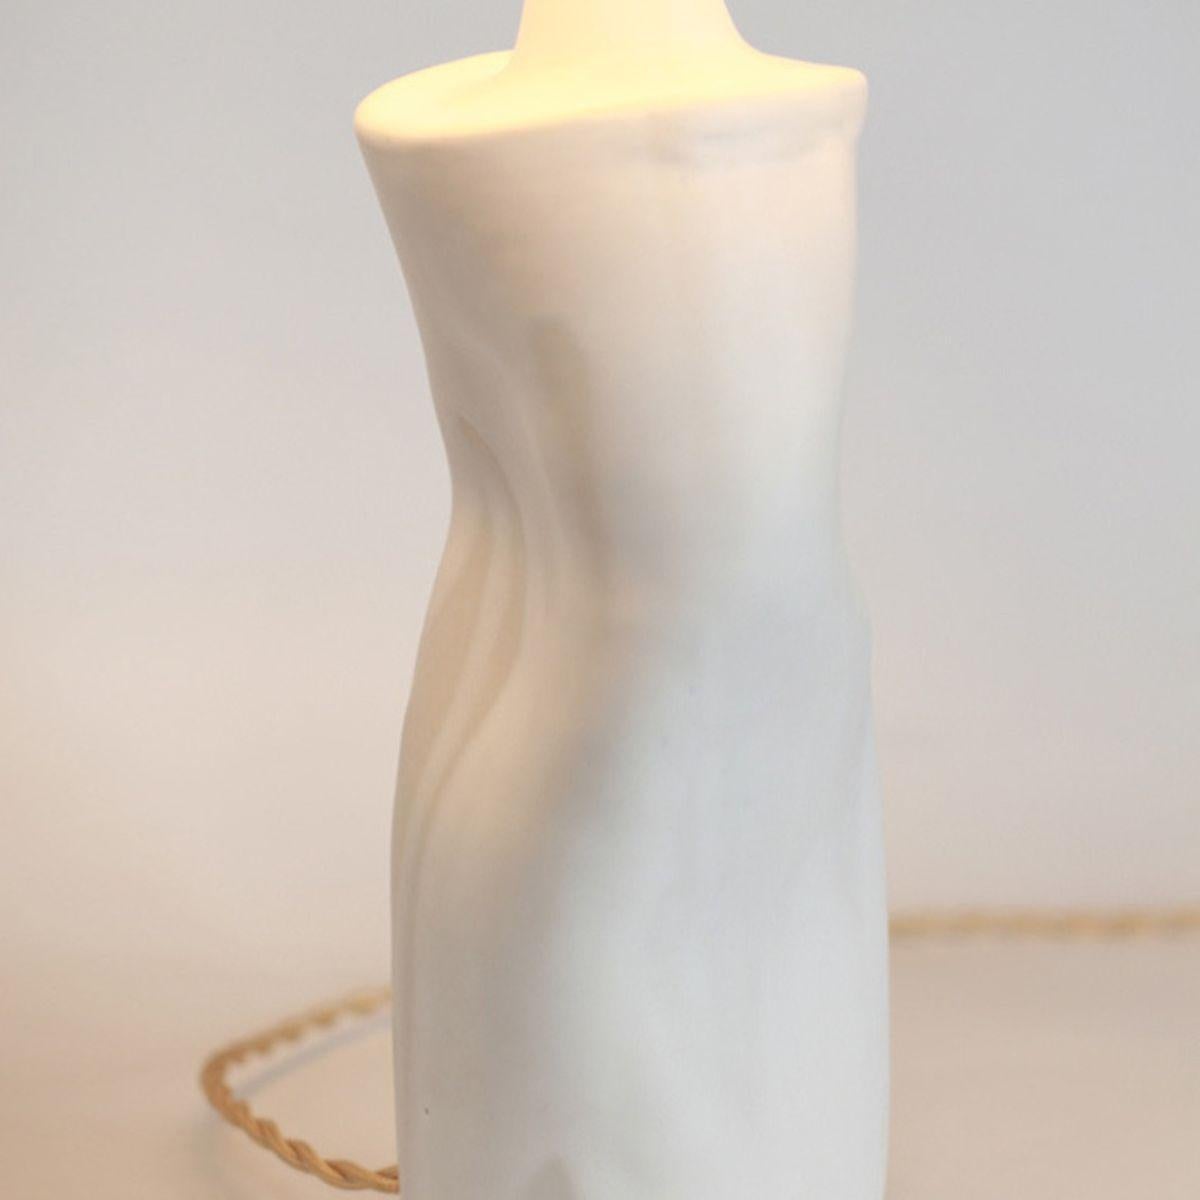 'Difforme' White Ceramic Table Lamp with Parchment Shade by Design Frères In New Condition For Sale In Los Angeles, CA